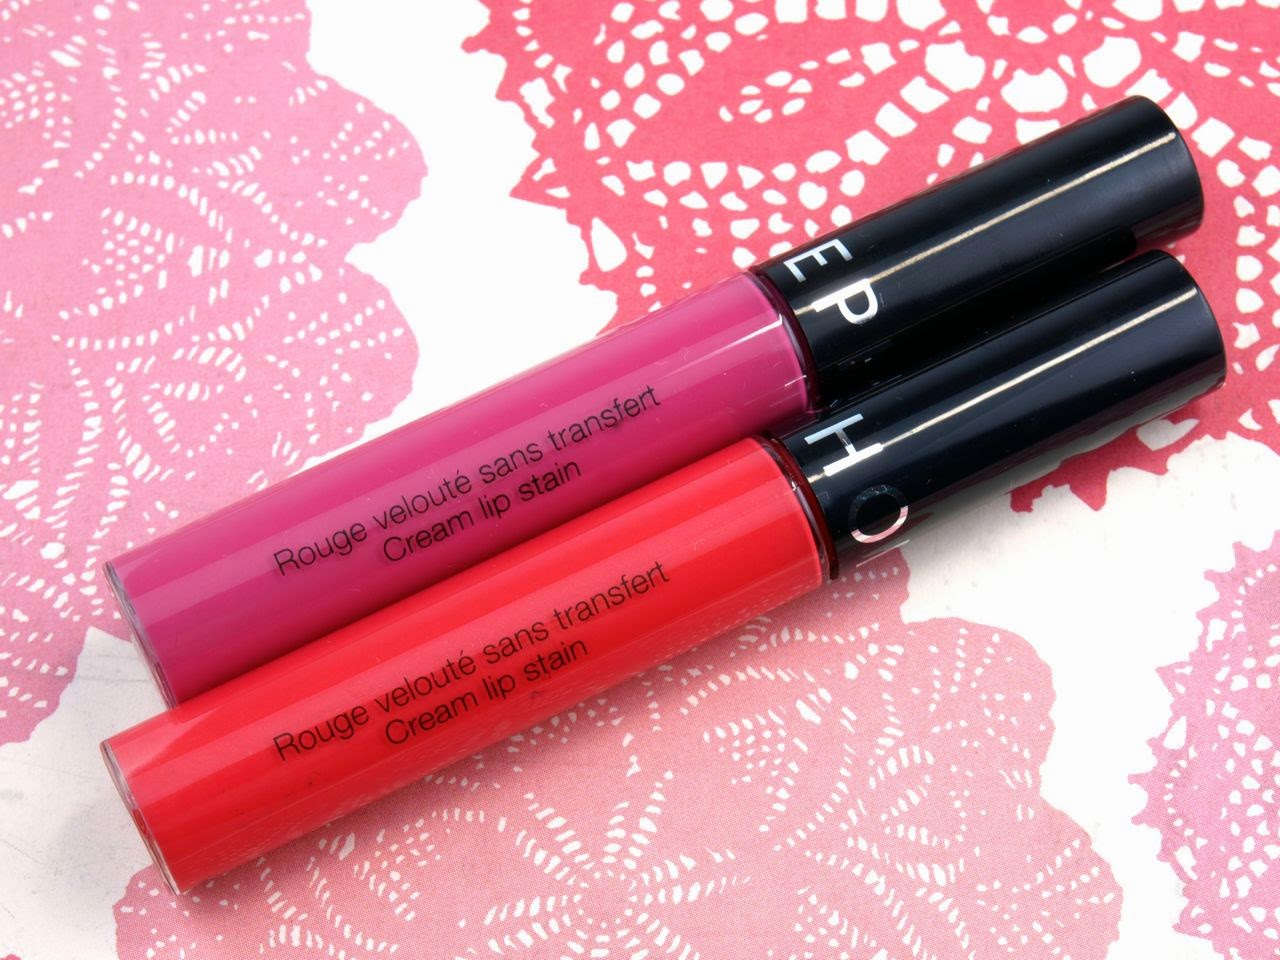 Sephora Collection Cream Lip Stain in "07 Cherry Blossom" & "09 Watermelon Slice": Review and Swatches